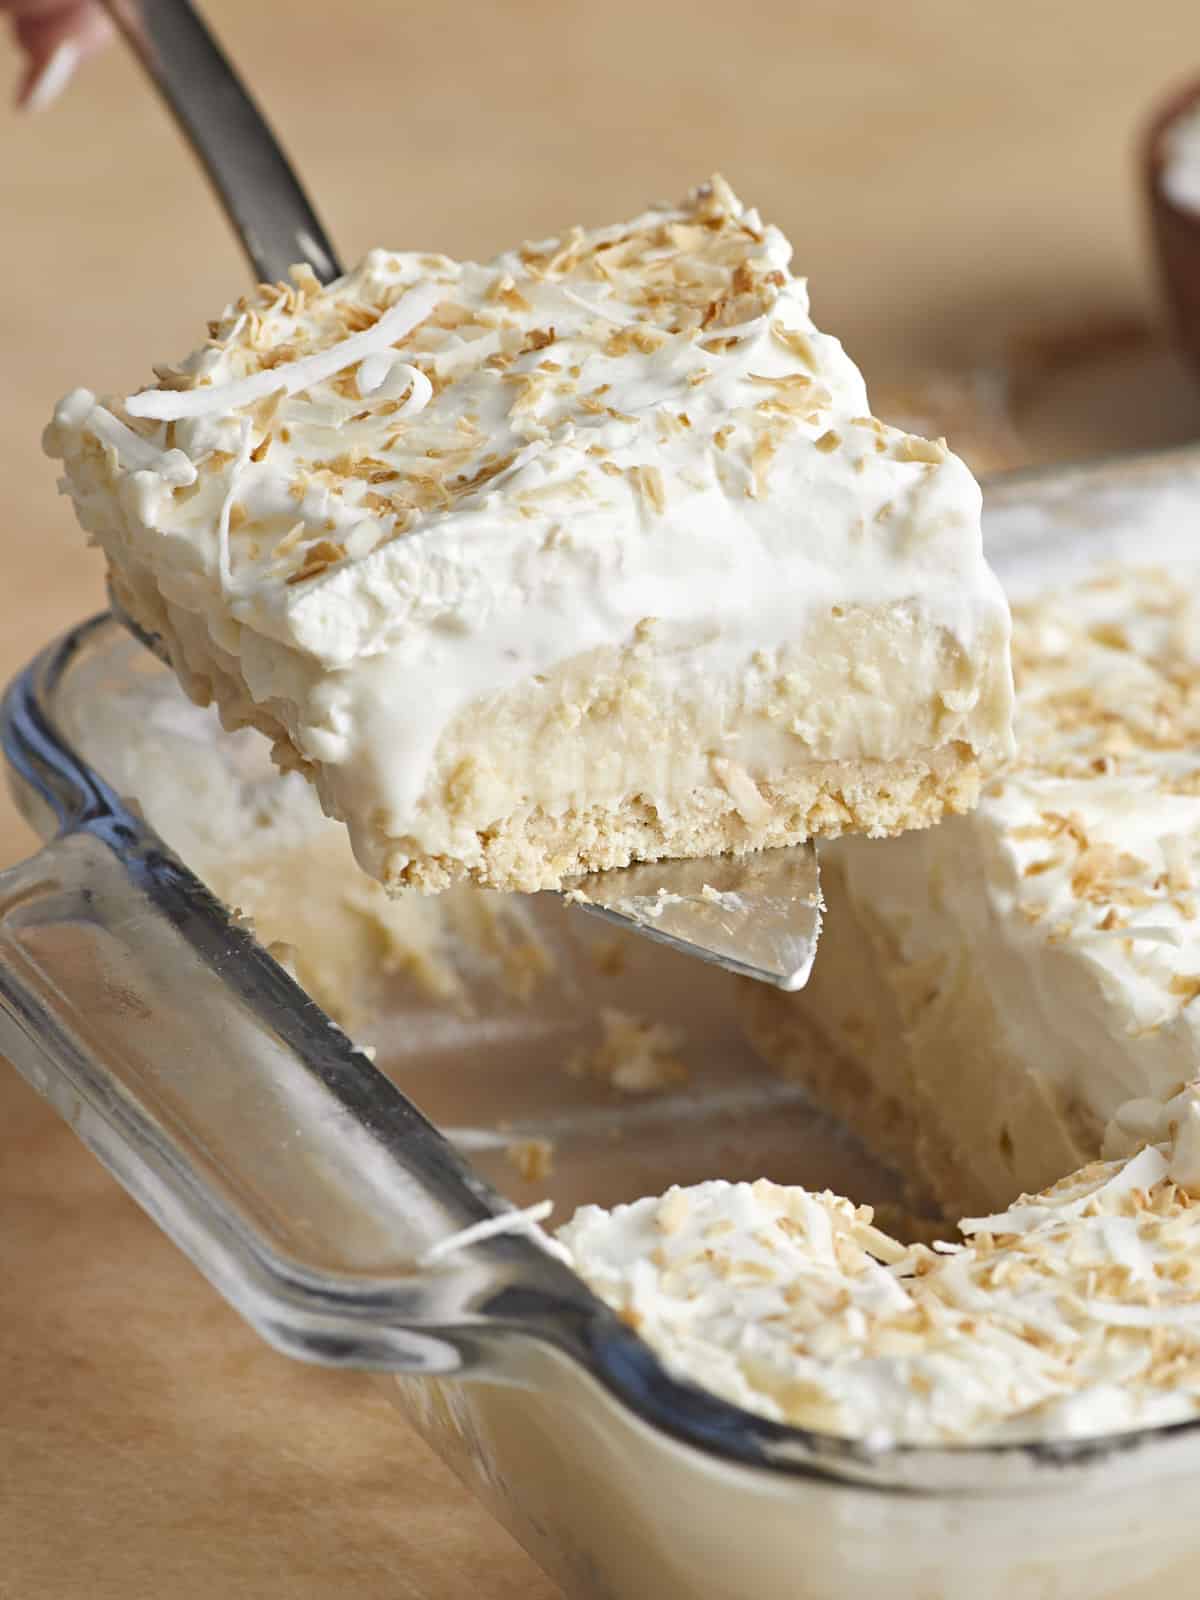 Side view of a coconut cream pie bar being lifted out of the casserole dish.